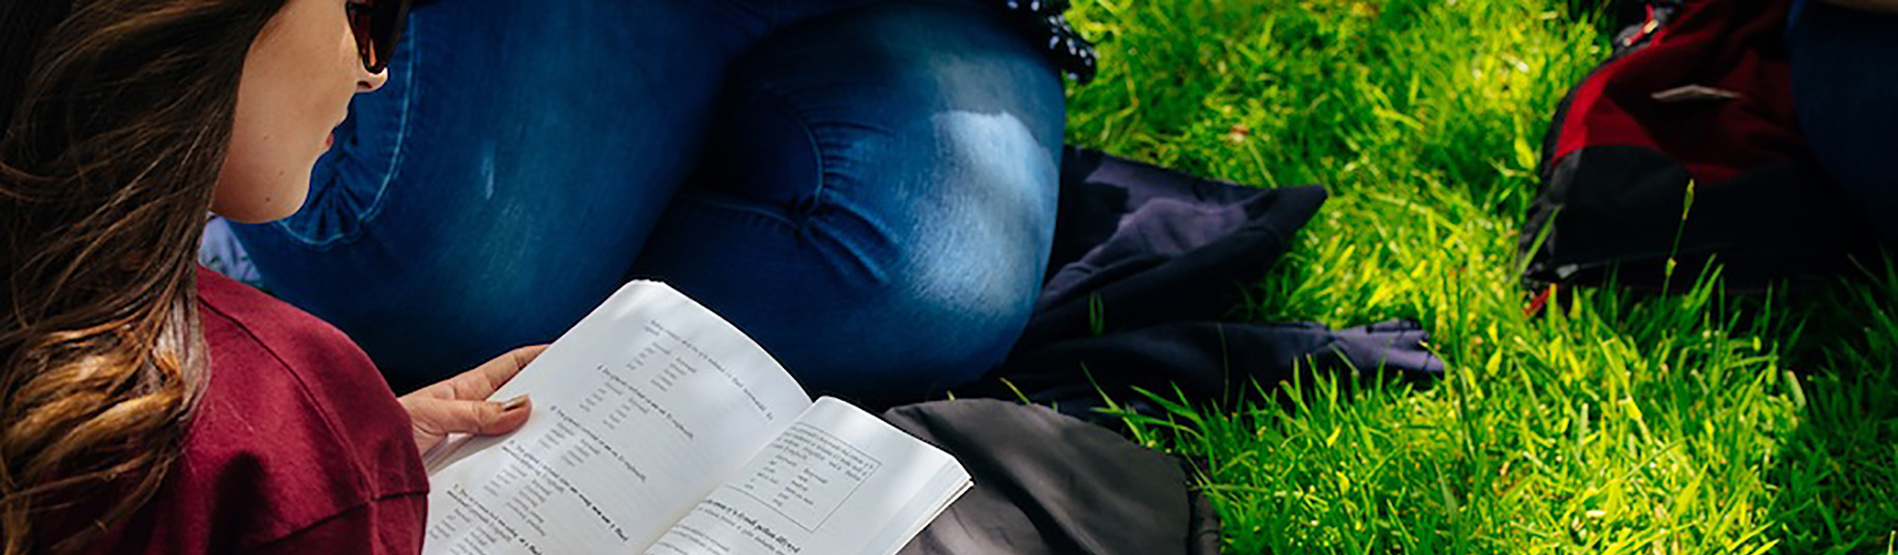 Student reading whist sitting on grass